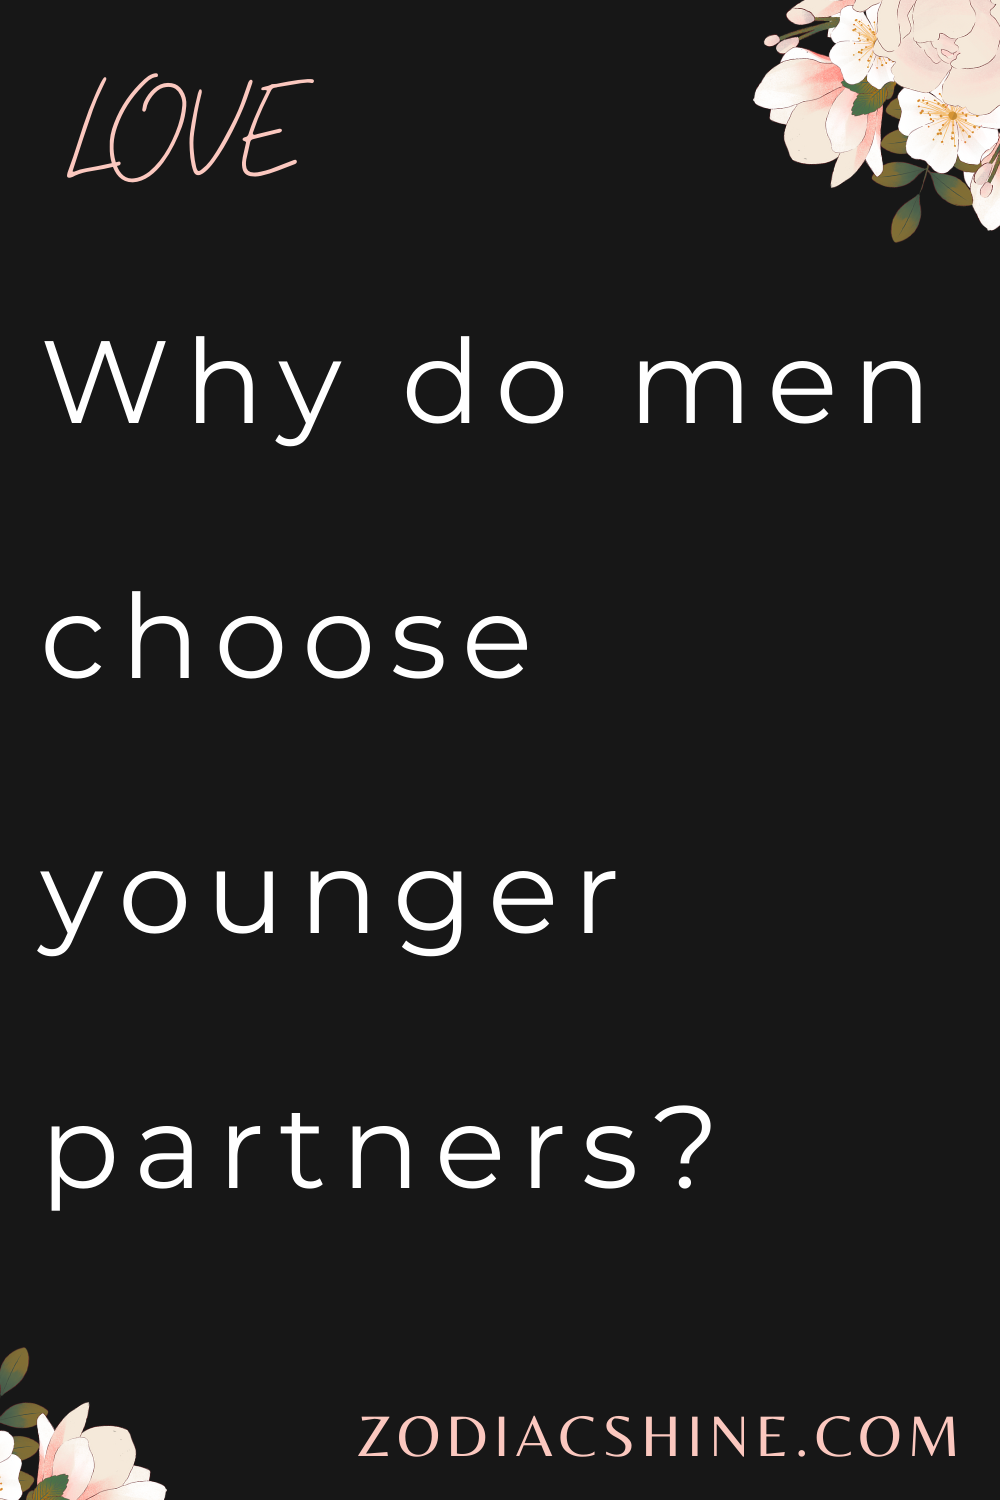 Why do men choose younger partners?